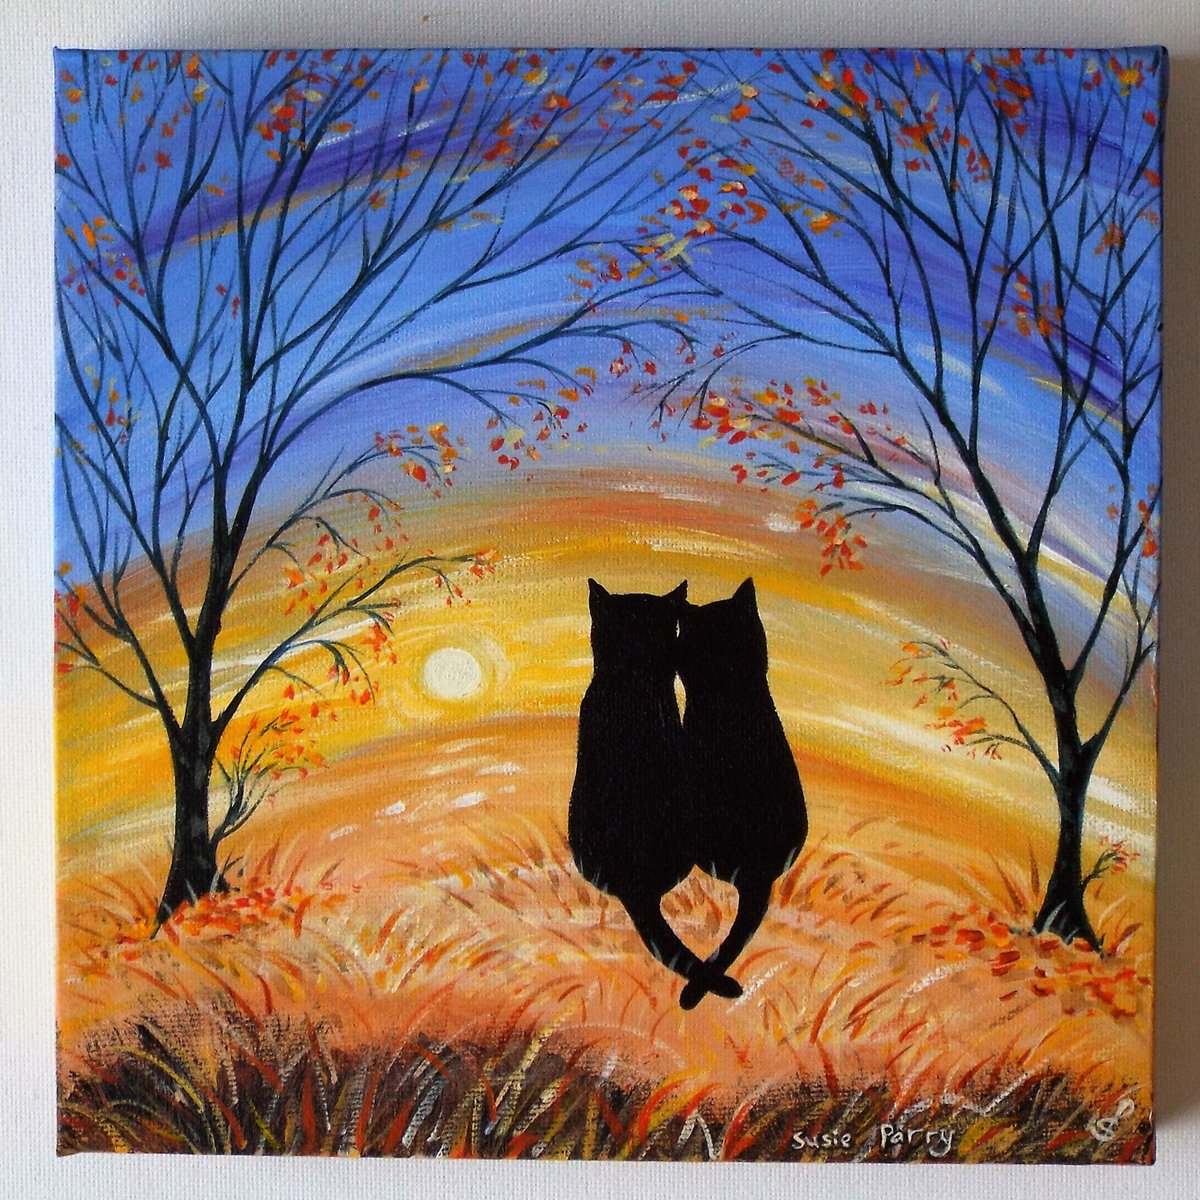 A little black cat painting for my cat loving friends, because it's #internationalcatday 🐈‍⬛ #sundayvibes #CatsLover #CatsAreFamily #AdoptDontShop #AdoptDontBuy #HalloweenCatParade23 🤗🥰😺🎃🐈‍⬛